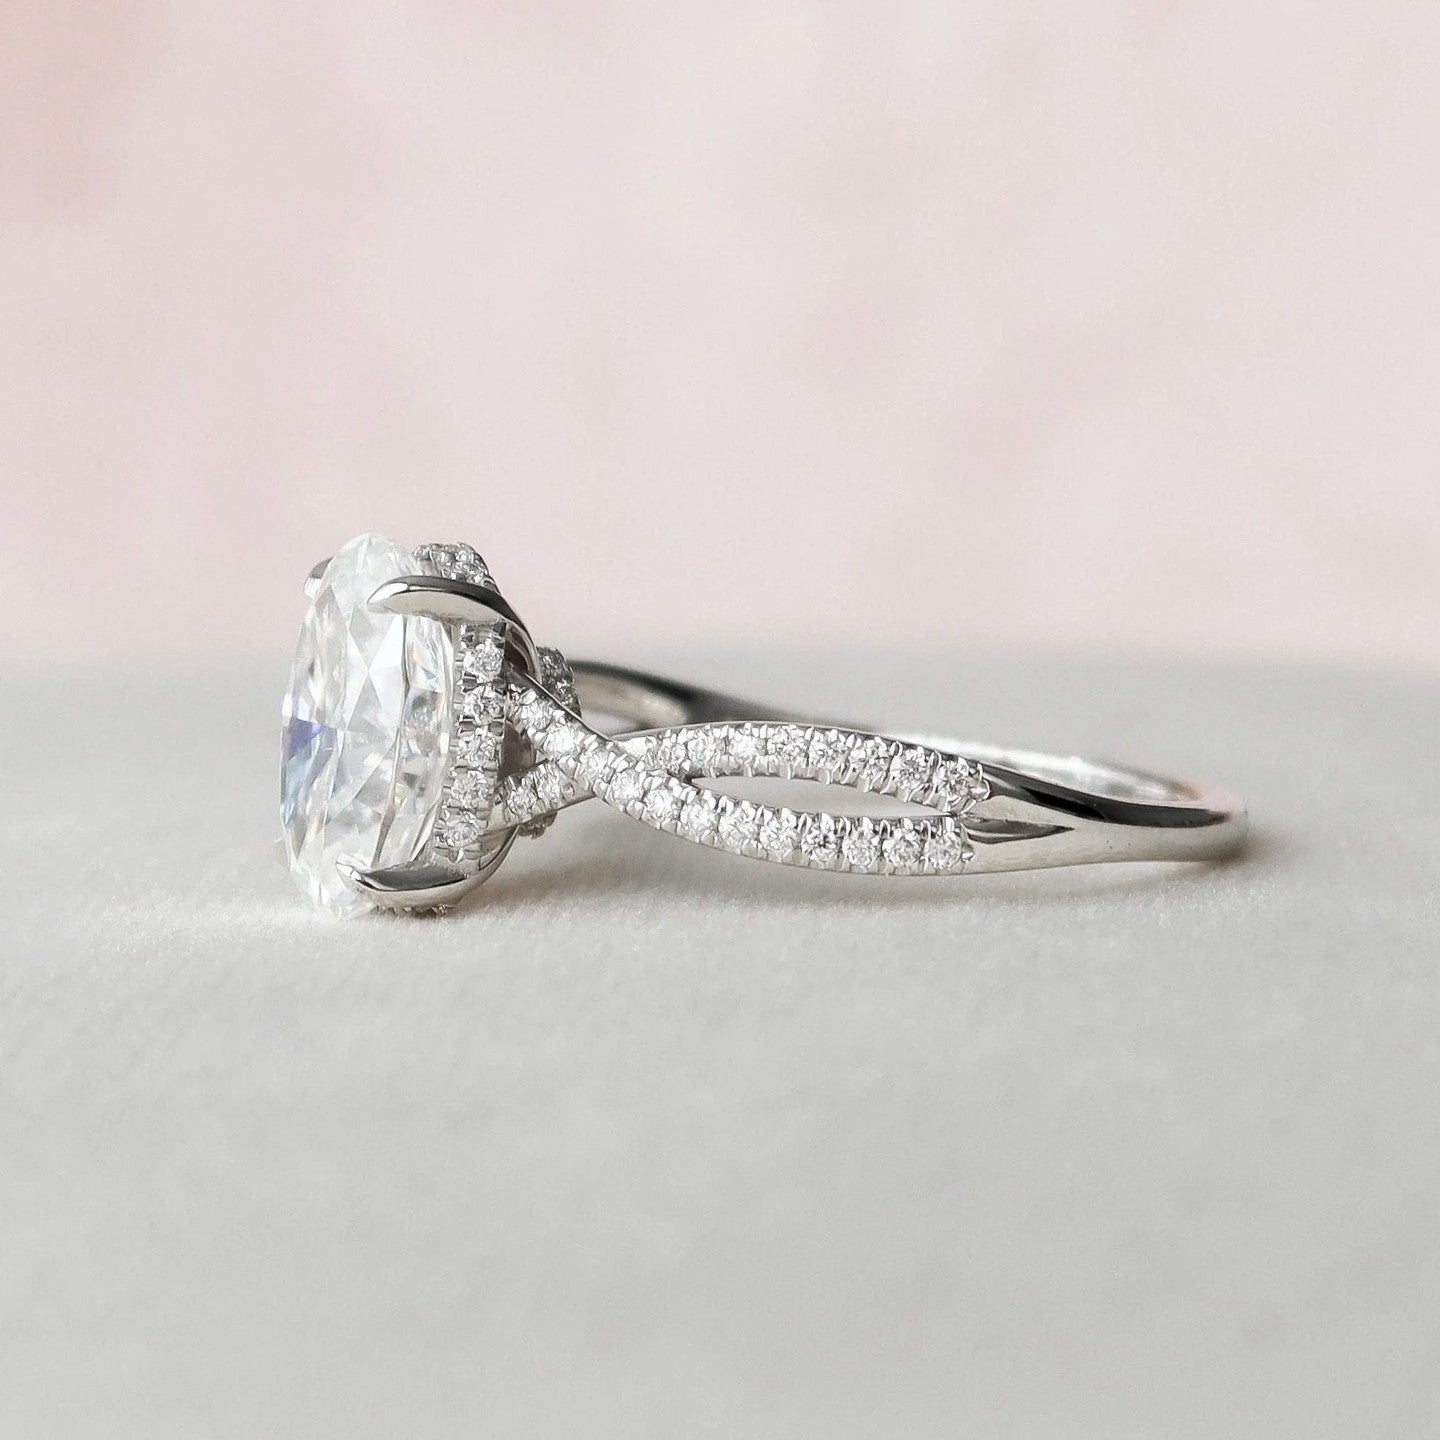 2.0 Carat Oval Cut Diamond Ring with Twisted Band and Pave Detail